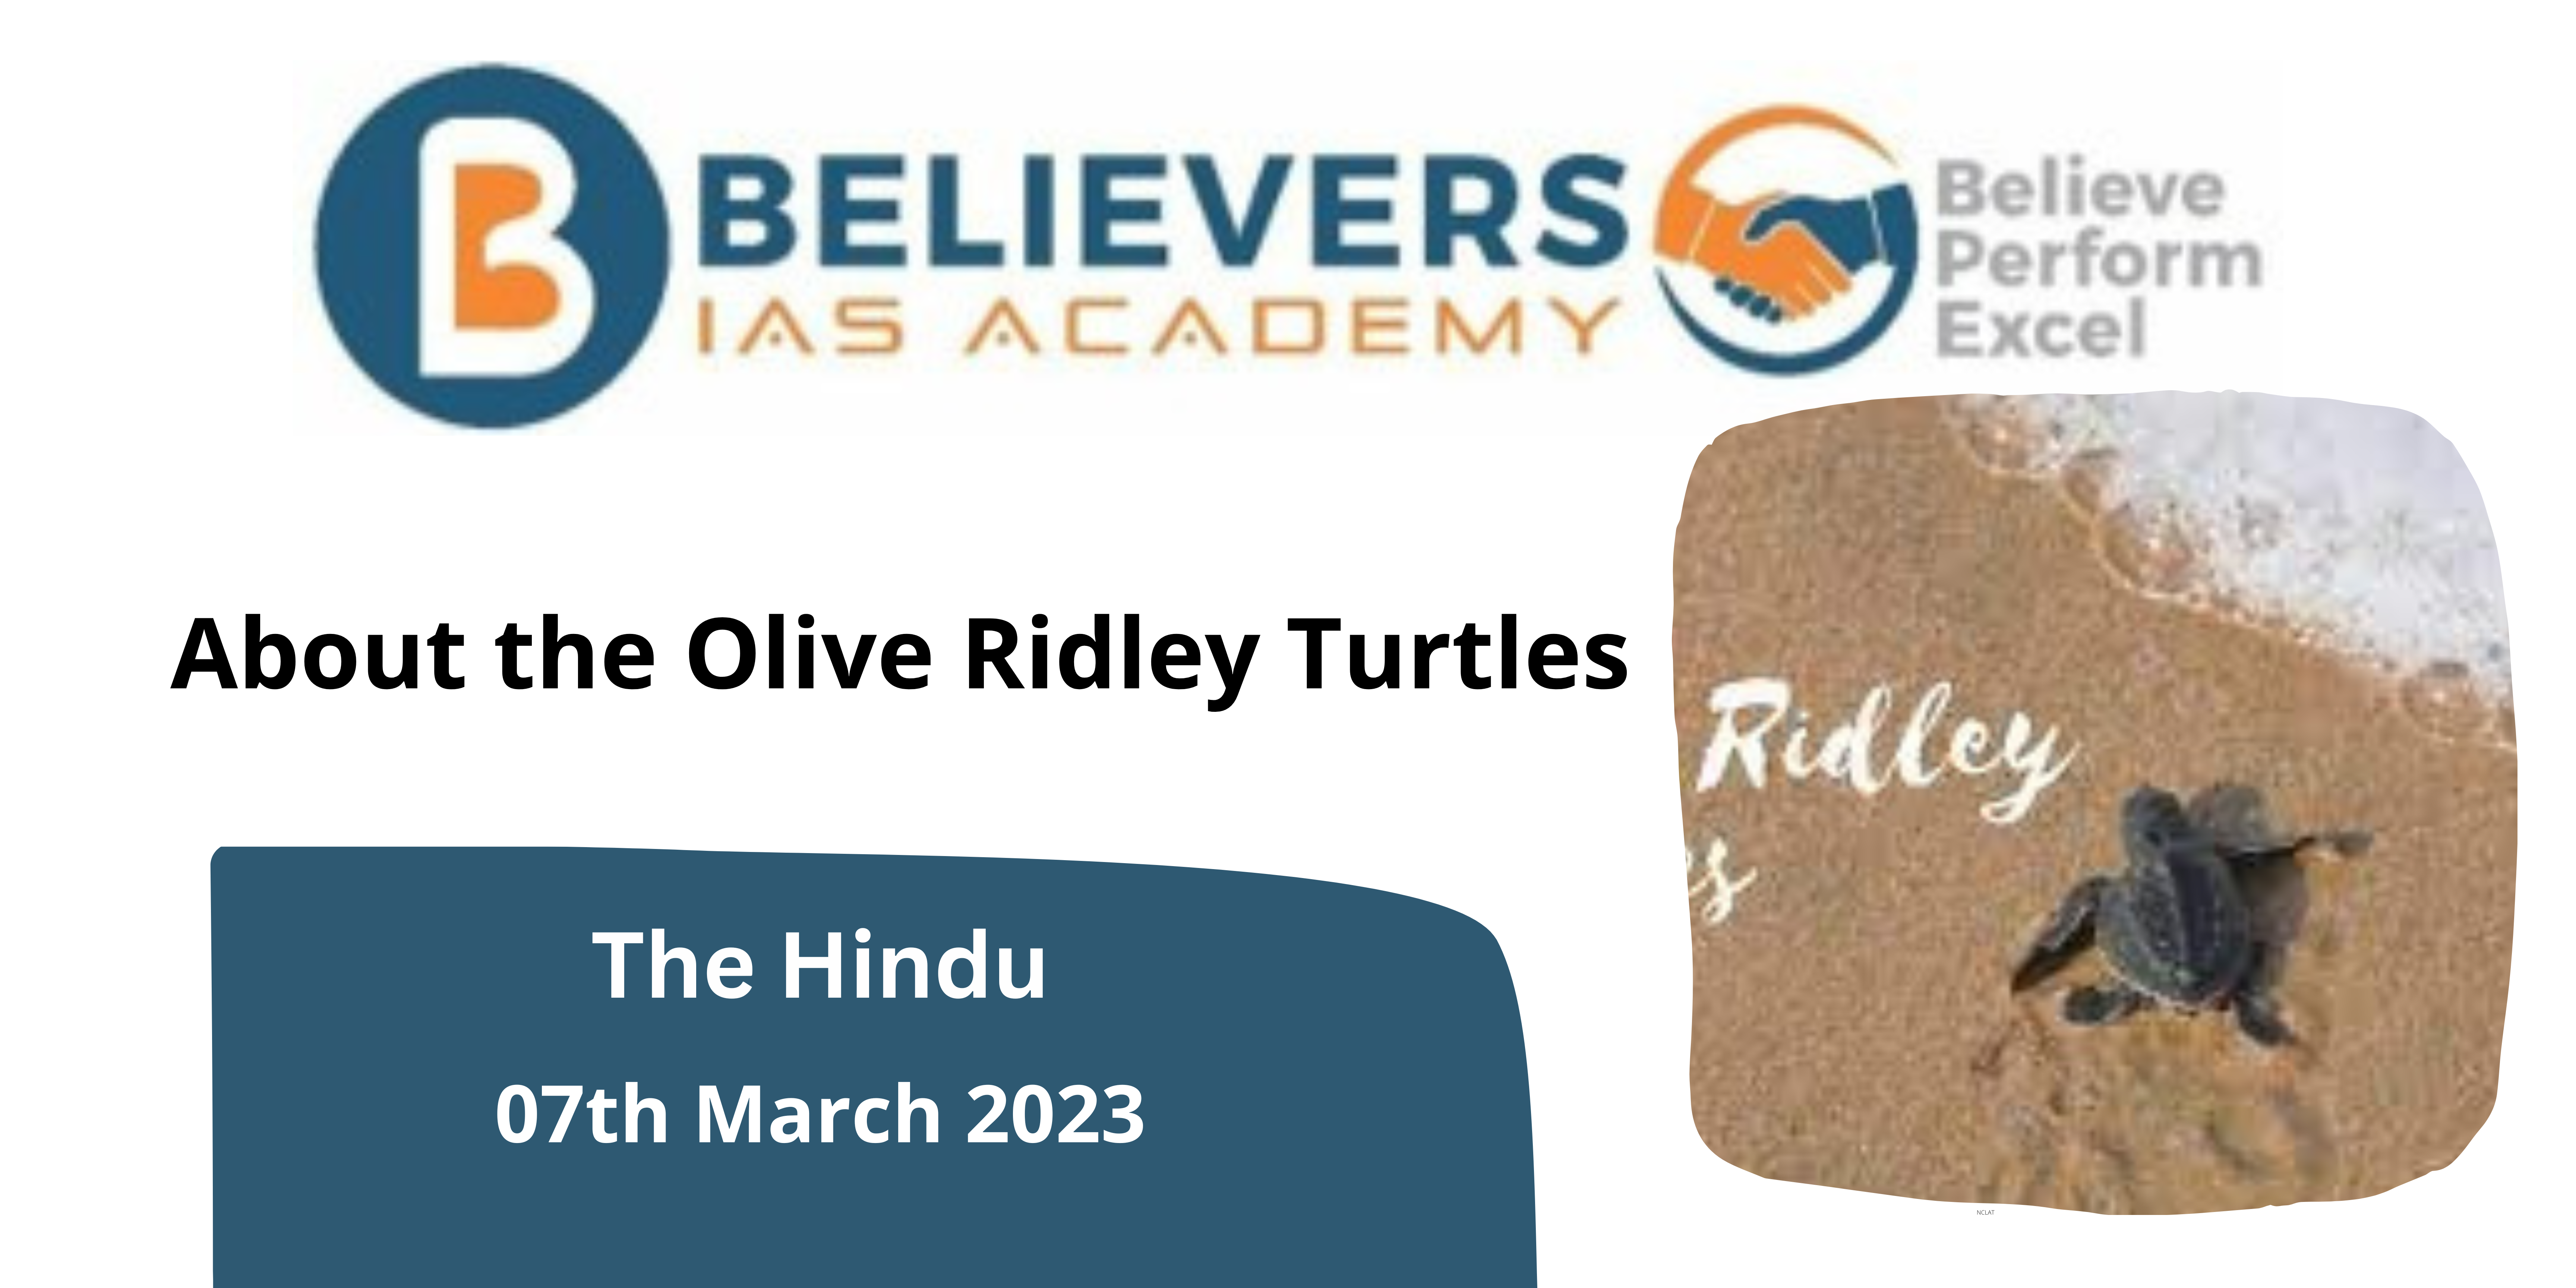 About the Olive Ridley Turtles